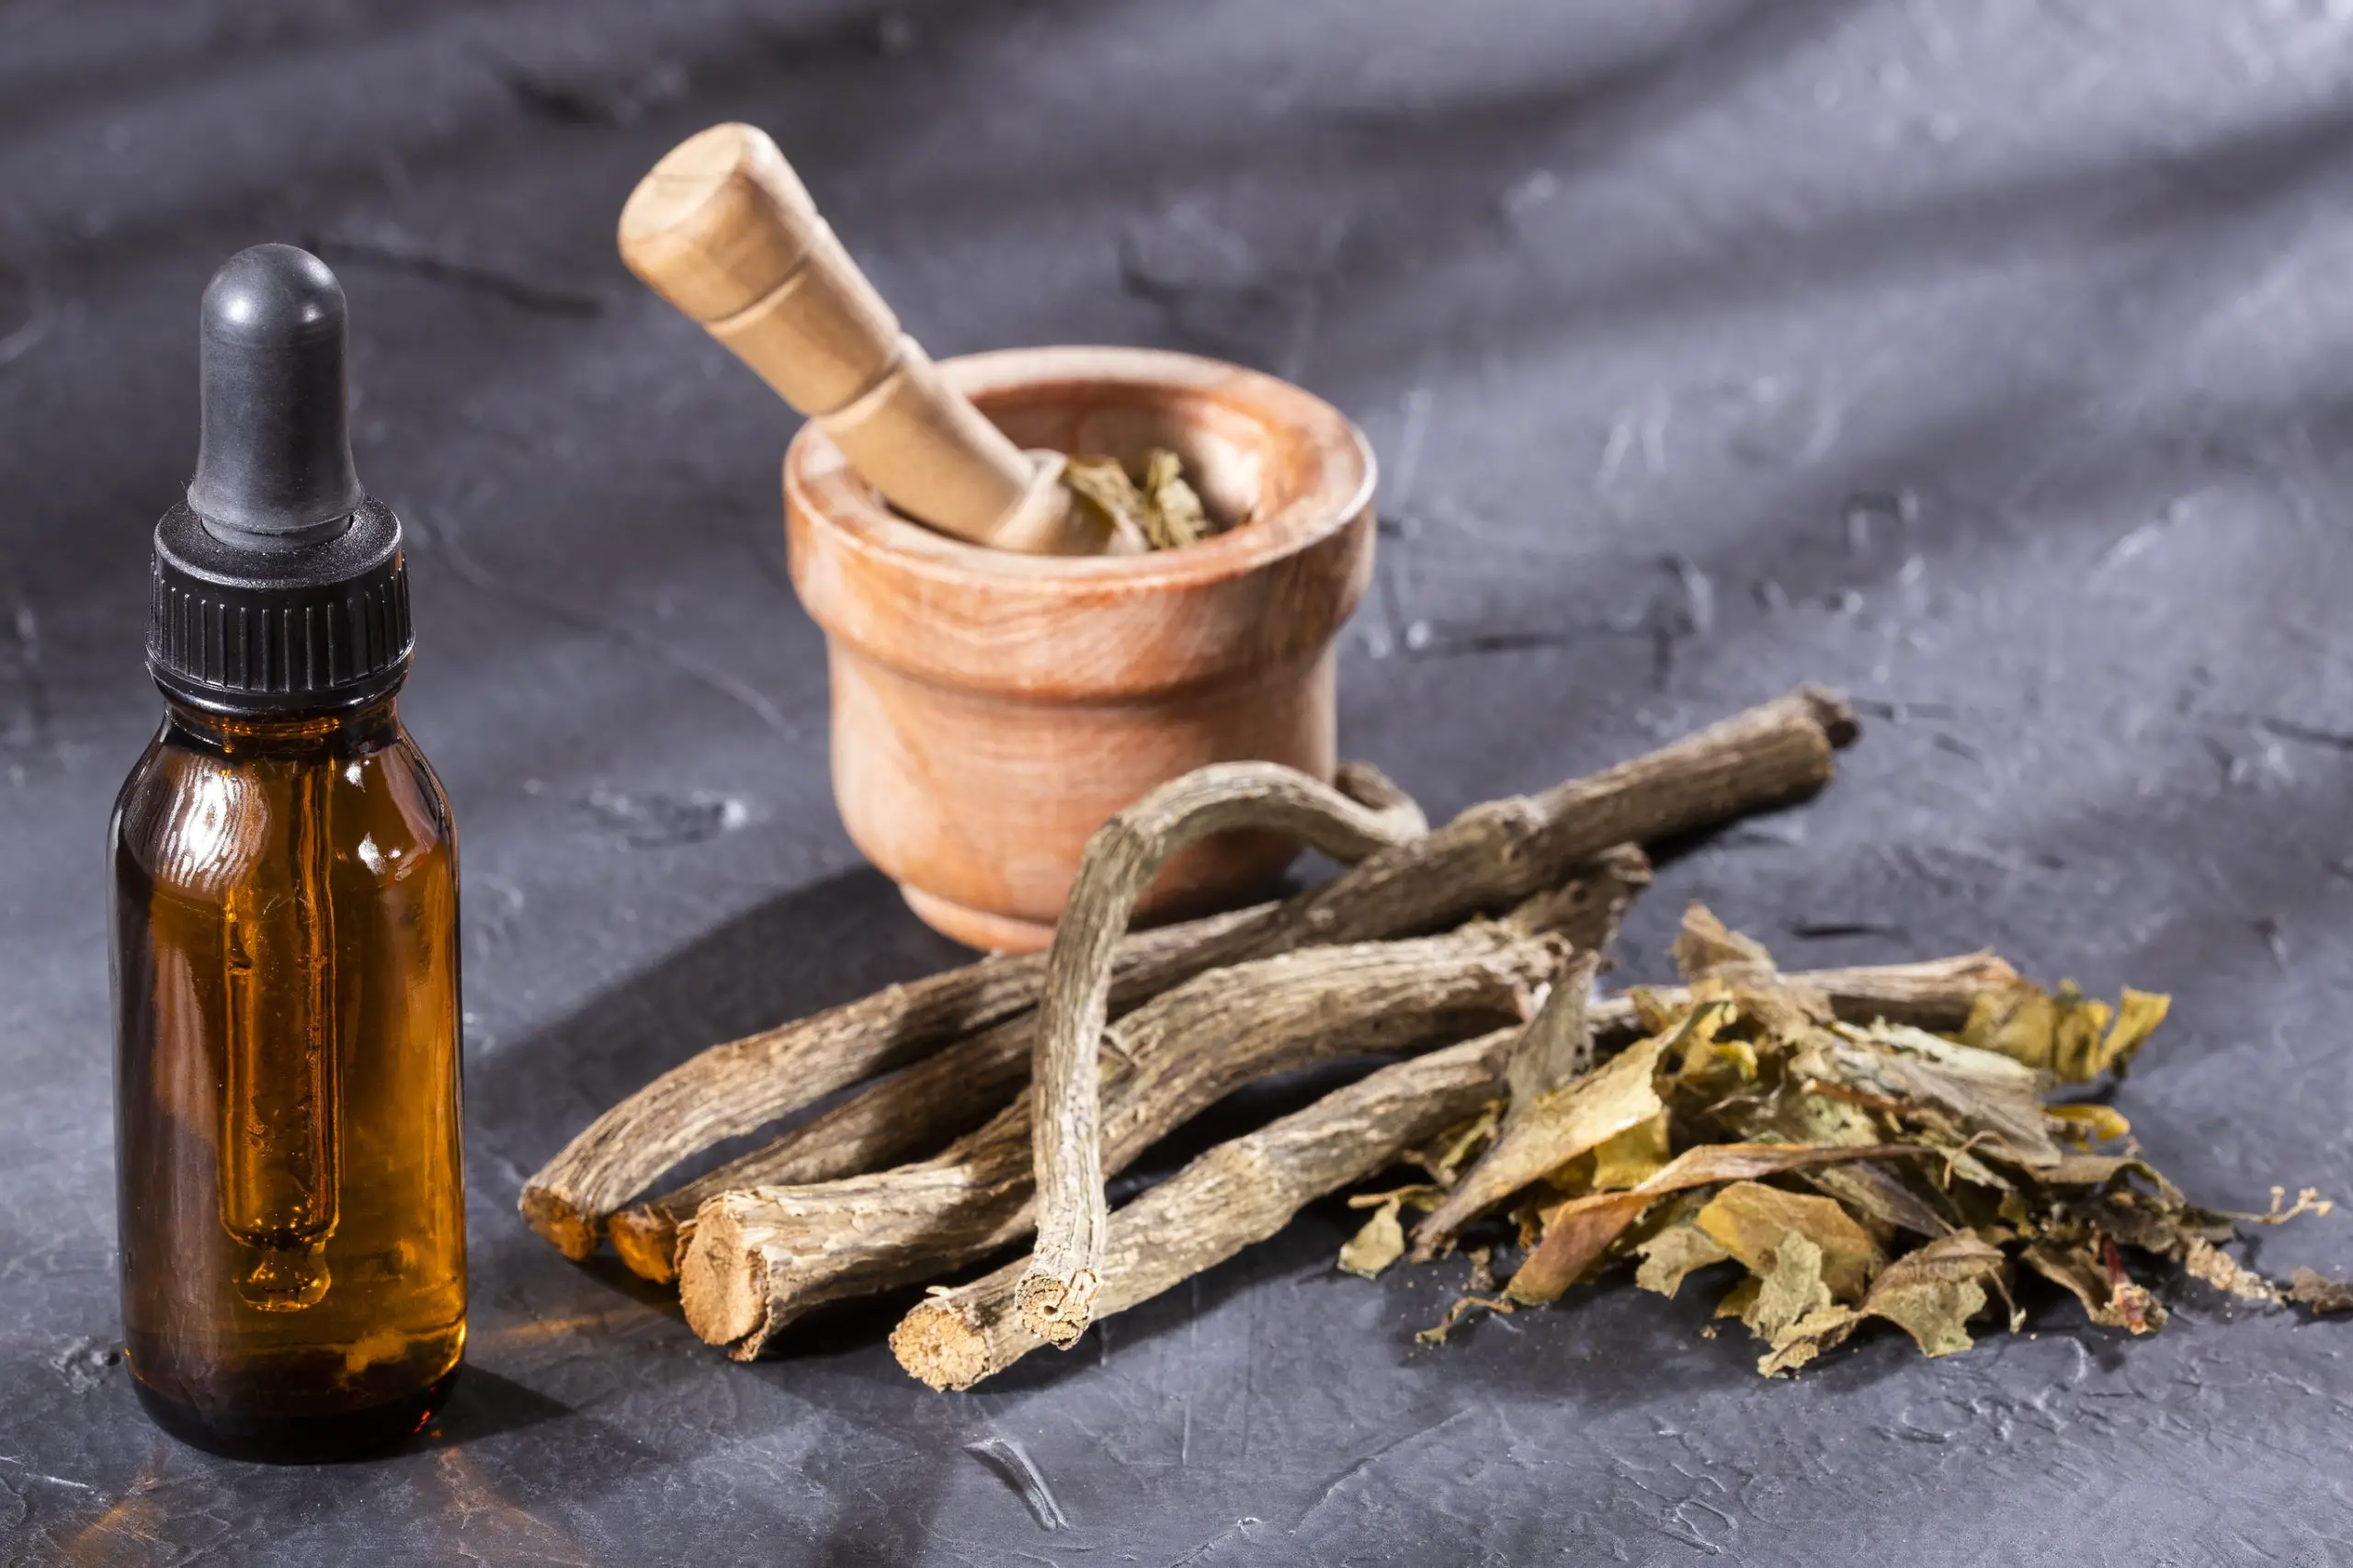 Does valerian root treat anxiety and insomnia?